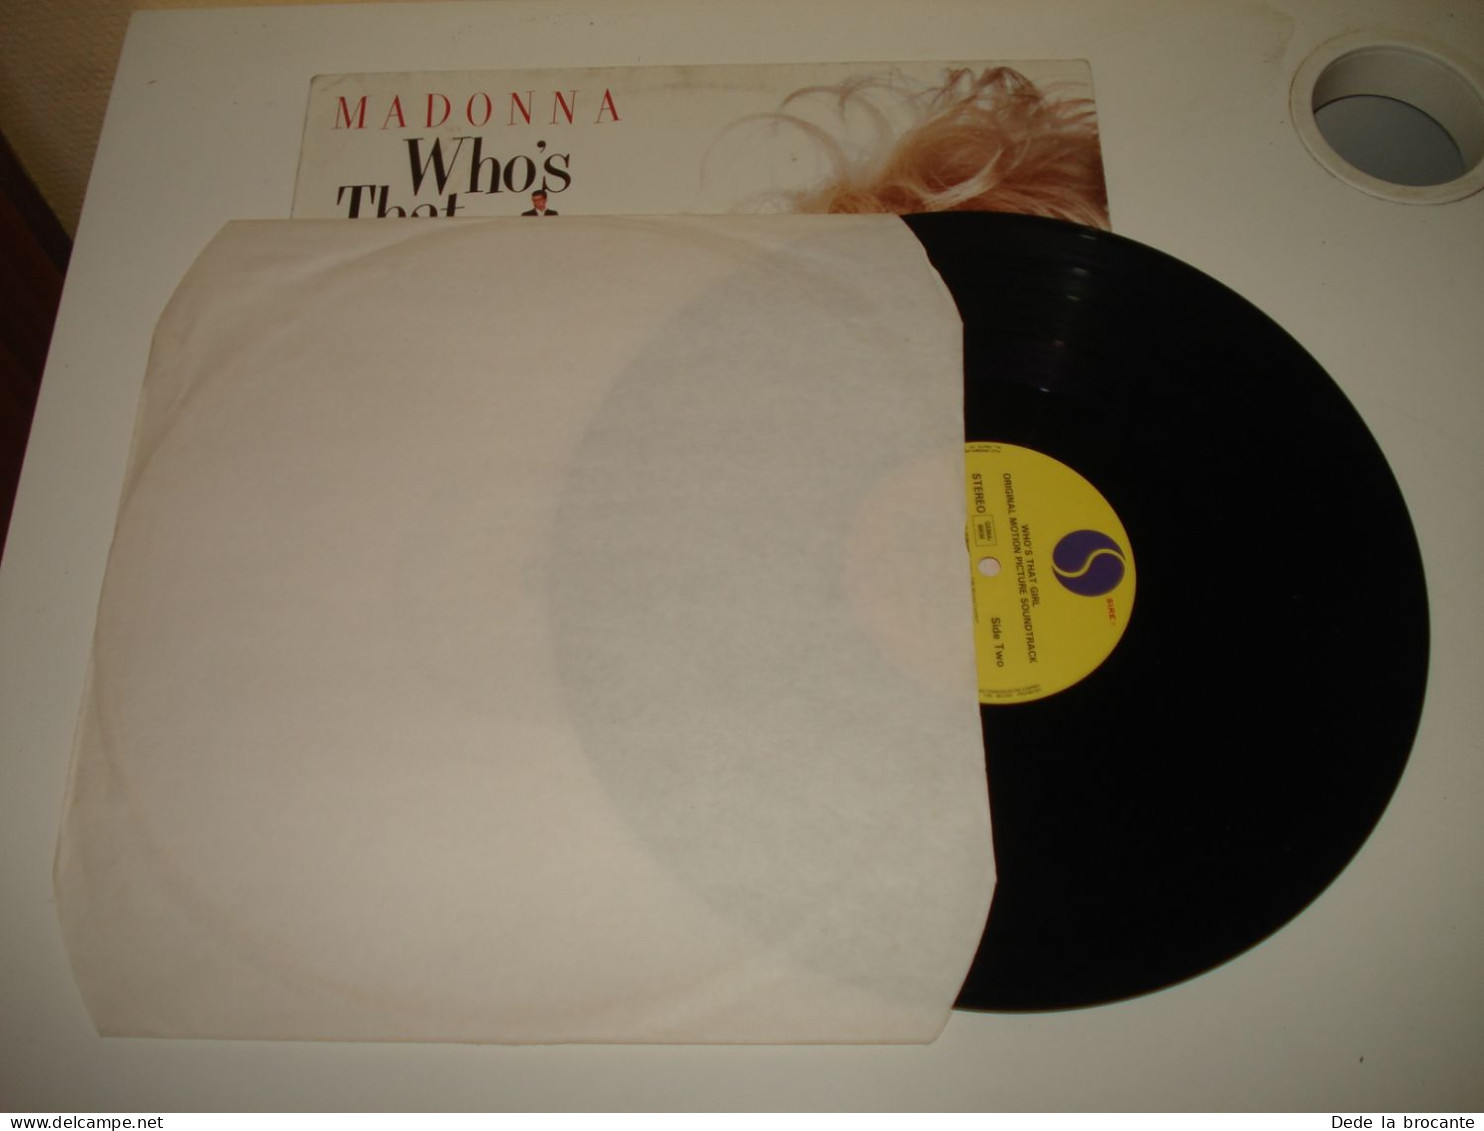 B12 / Madonna – Who's That Girl -Soundtrack - Sire – 925 611 1 - Ger 1987  EX/EX - Filmmusik